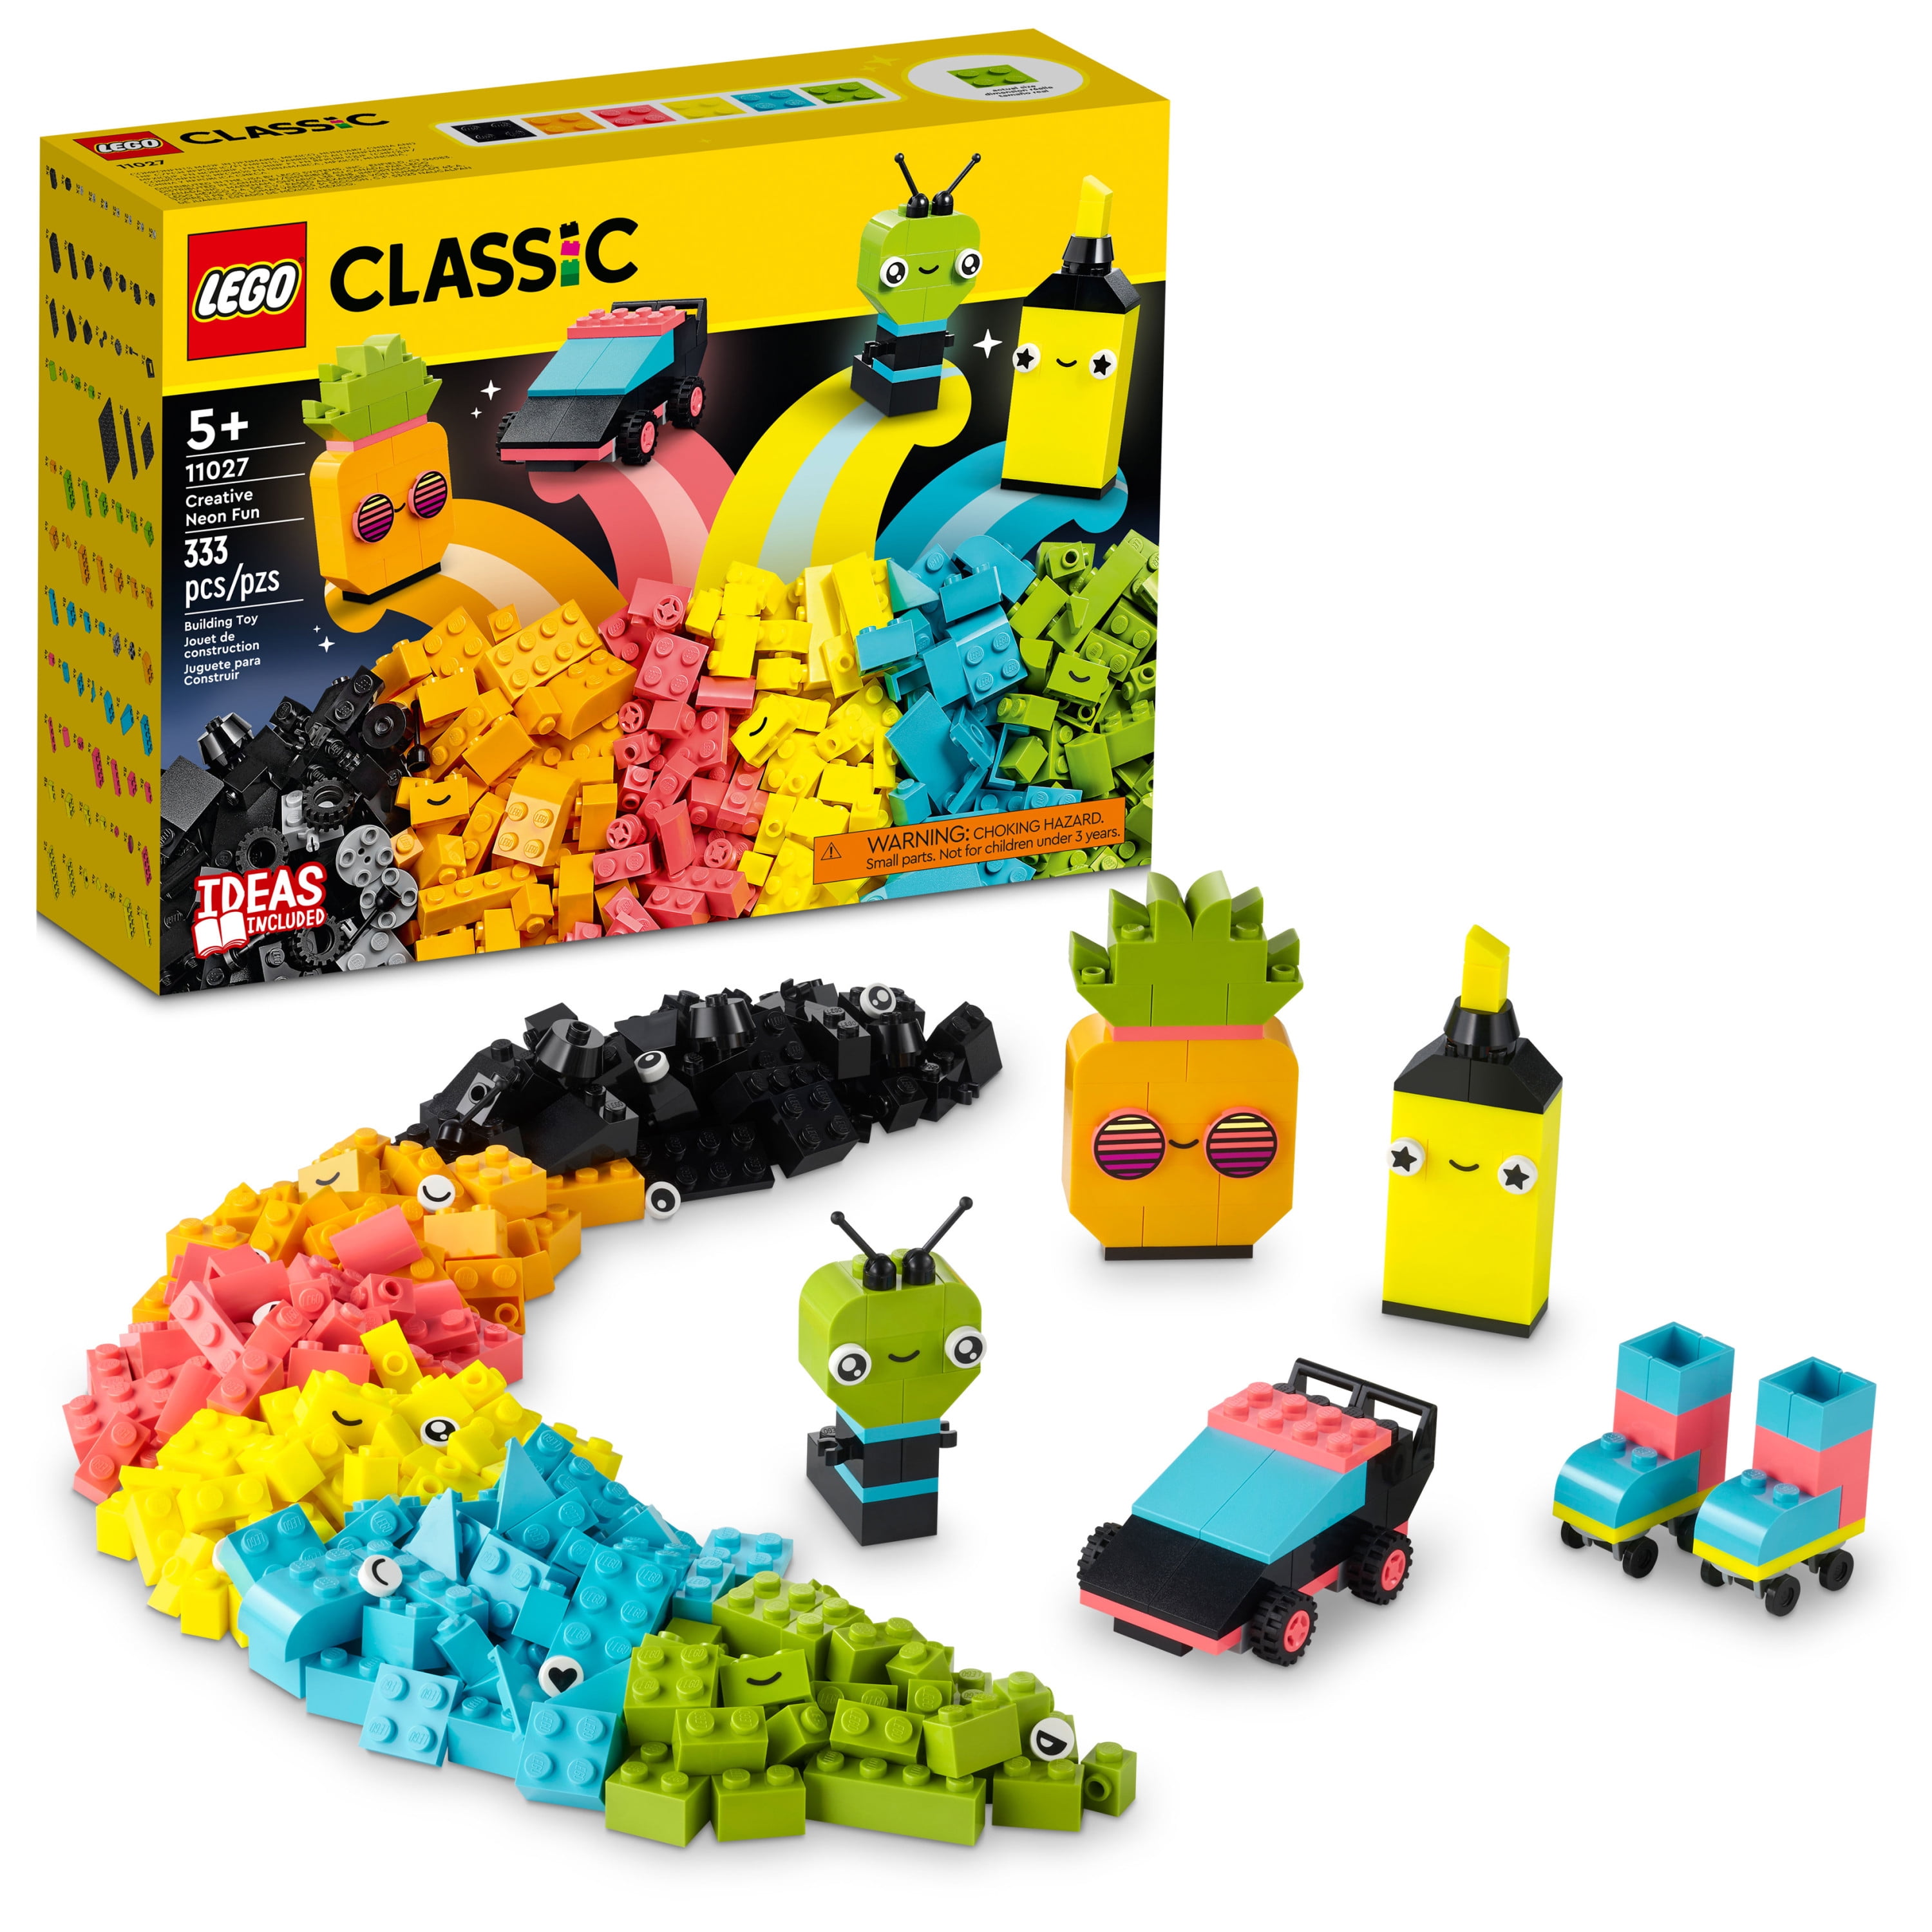 LEGO Classic Creative Neon Colors Fun Brick Box Set 11027, Building Toy to  Create a Car, Pineapple, Alien, Roller Skates, and More Building Ideas for  Kids, Boys, Girls Ages 5 Plus Years